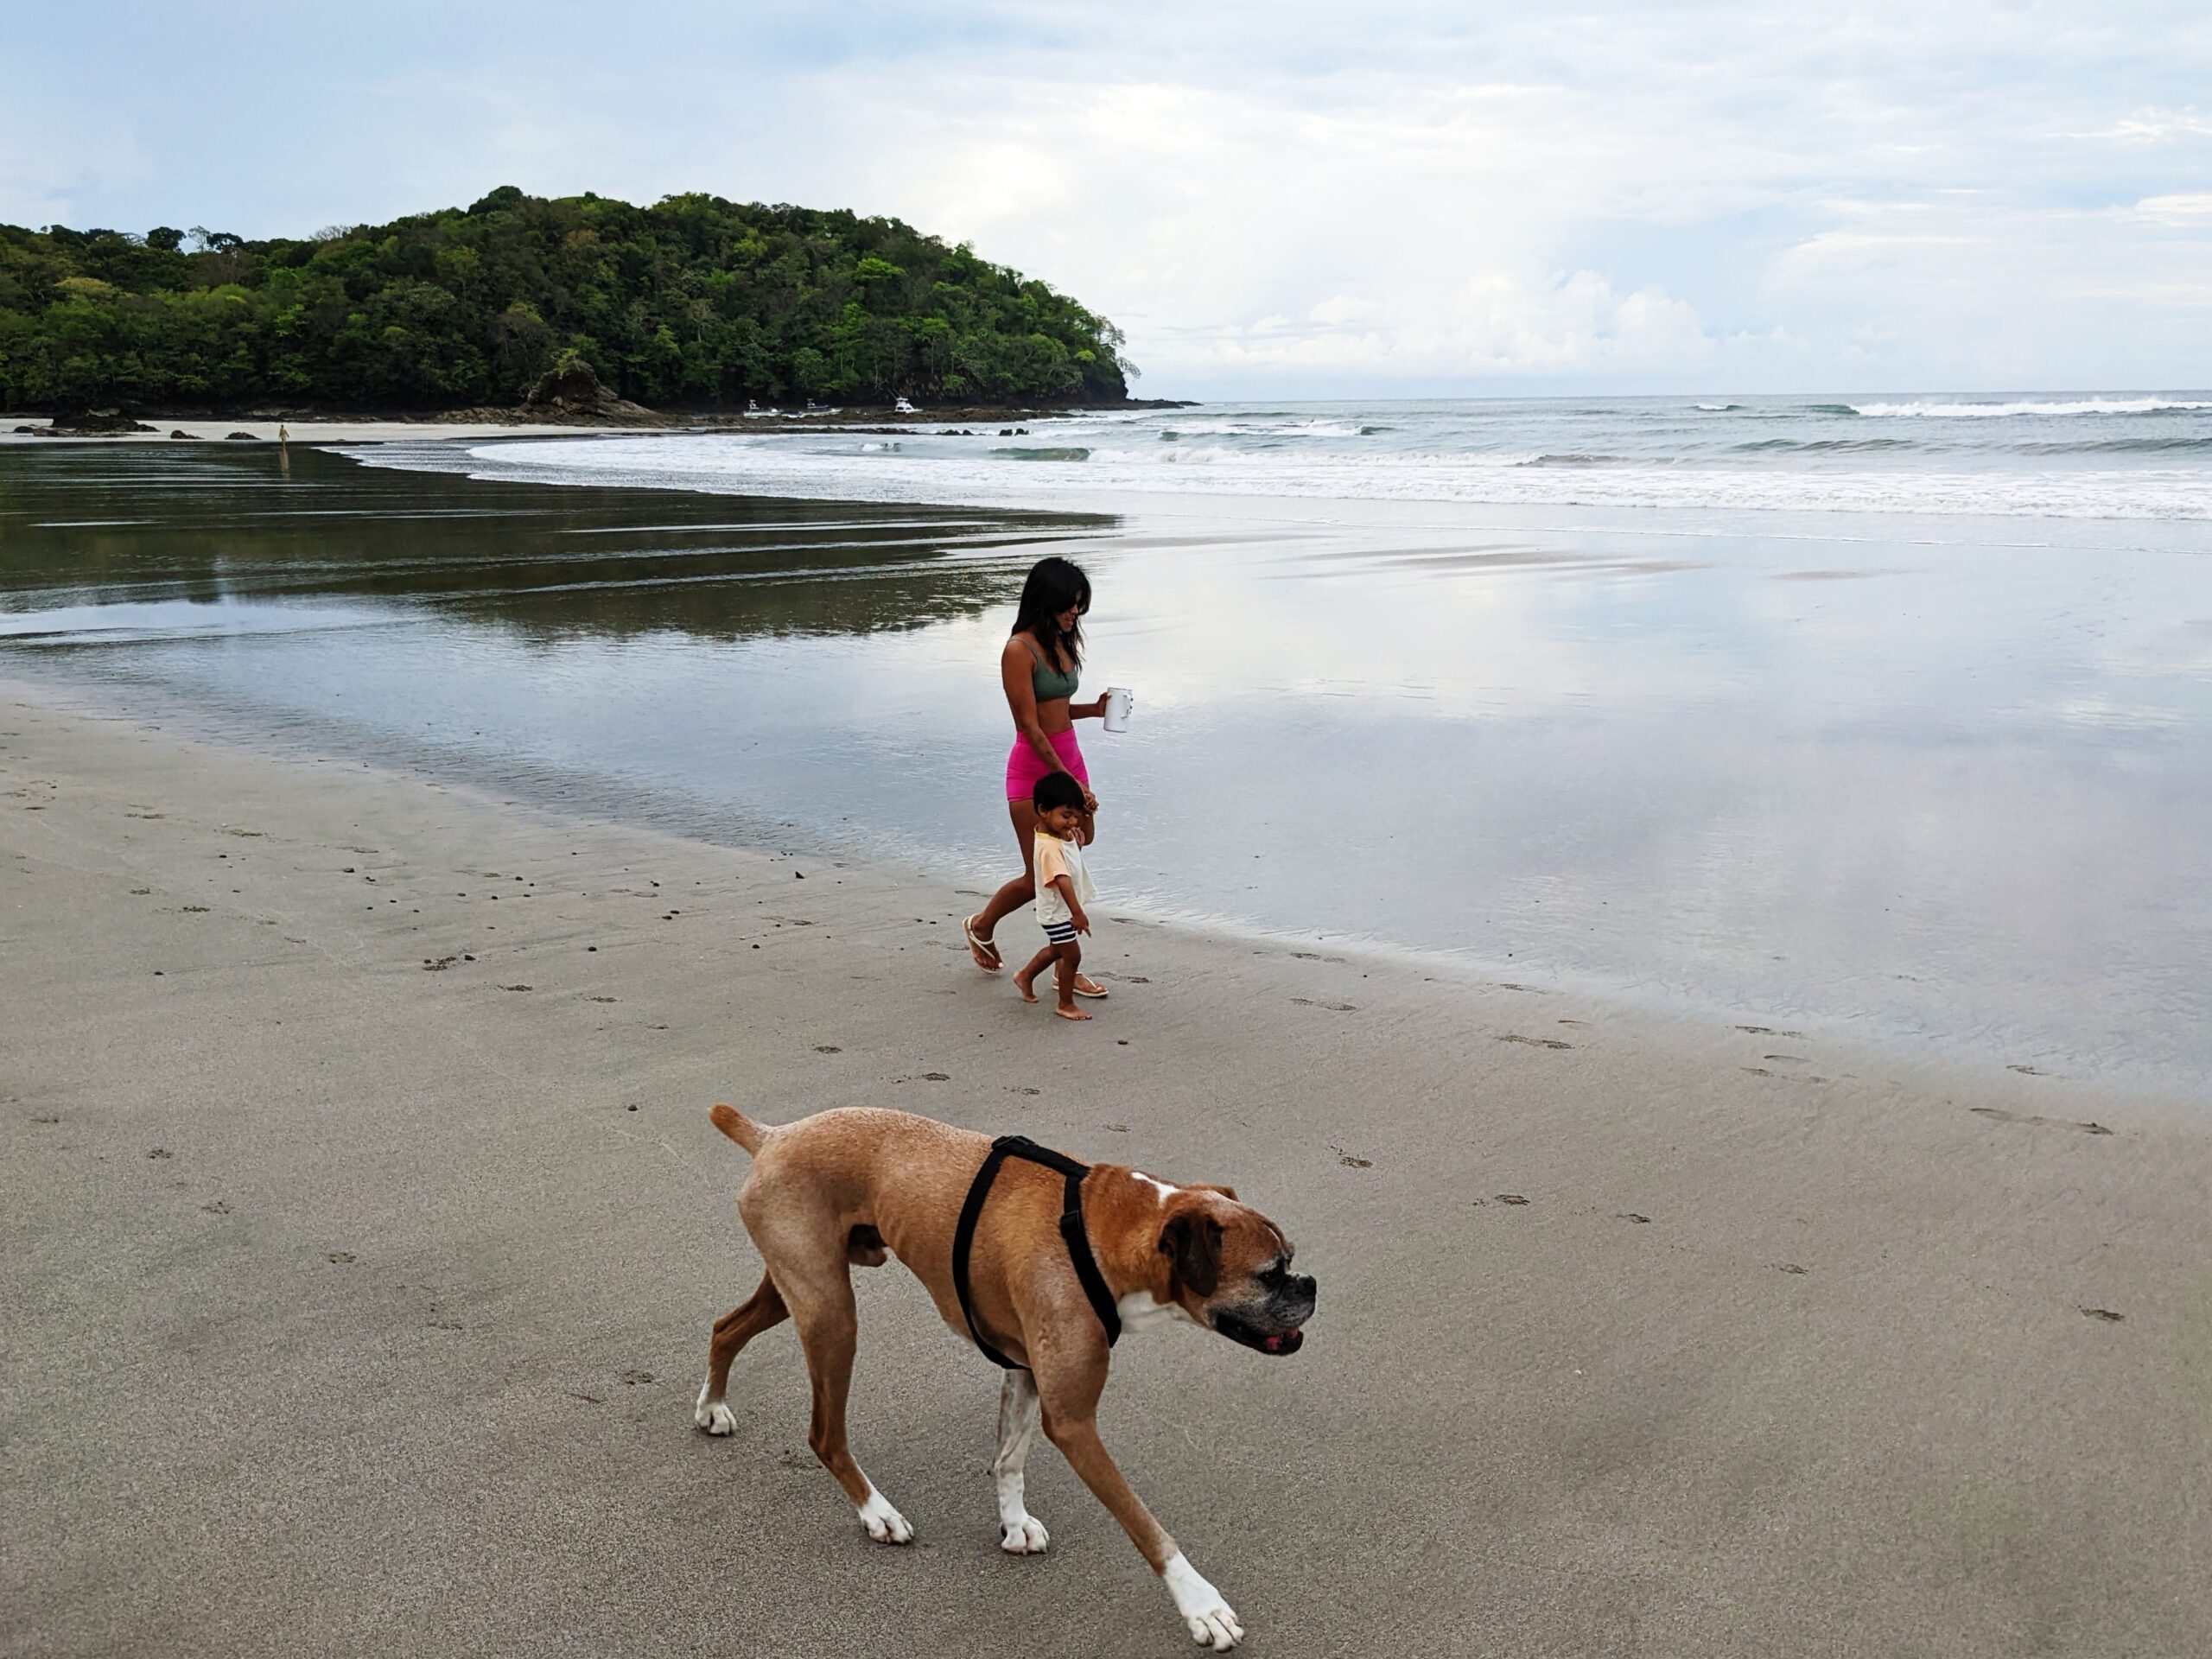 Surprising Things About Parenting In Costa Rica